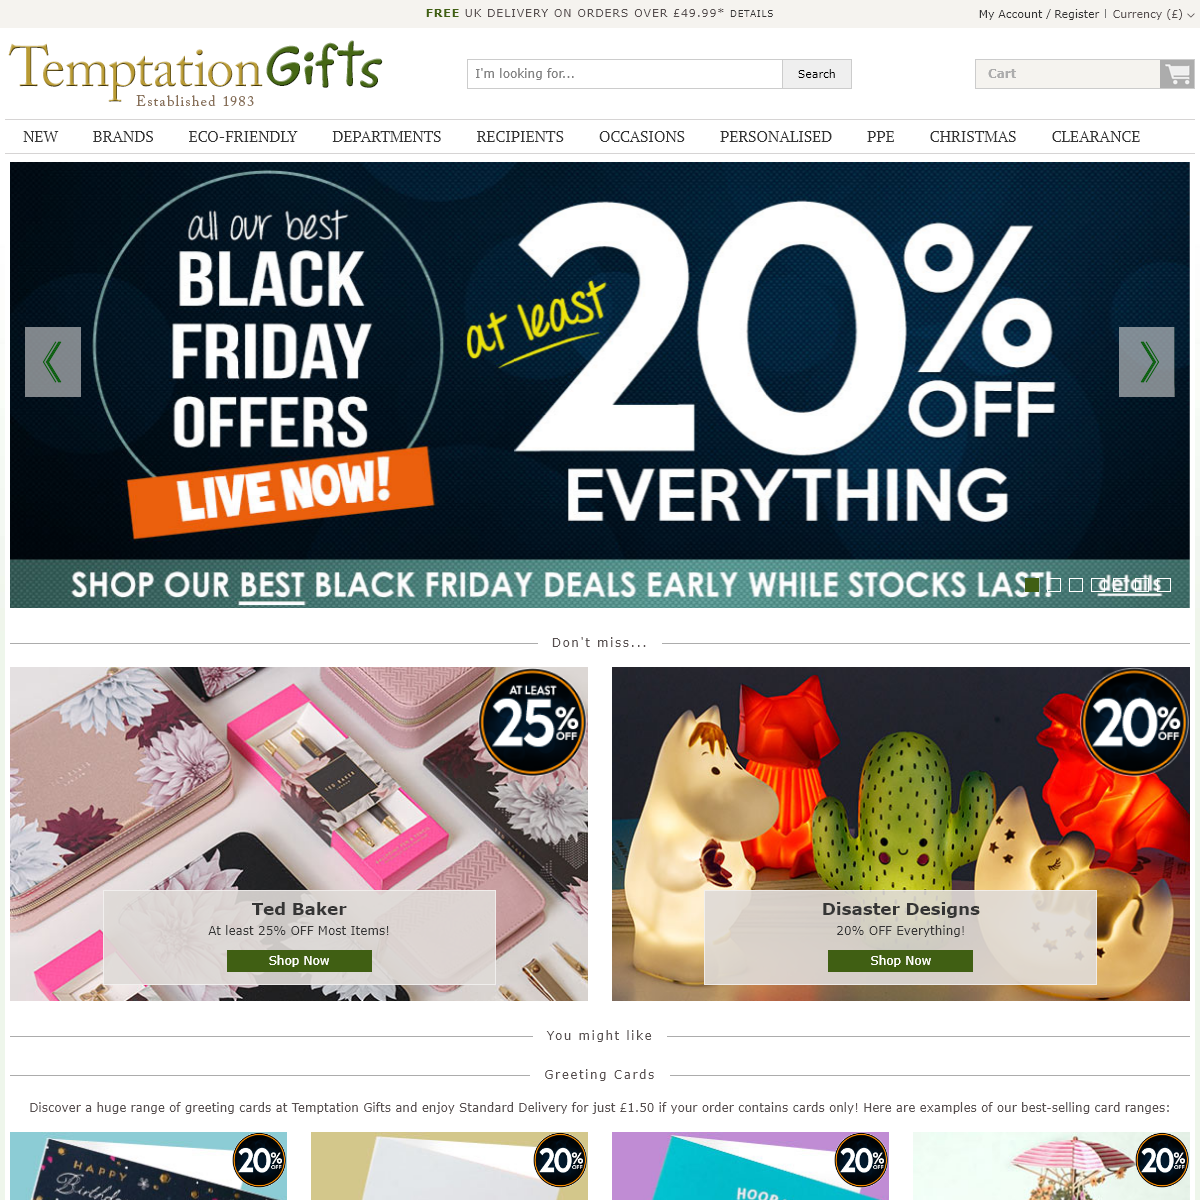 A complete backup of temptationgifts.com